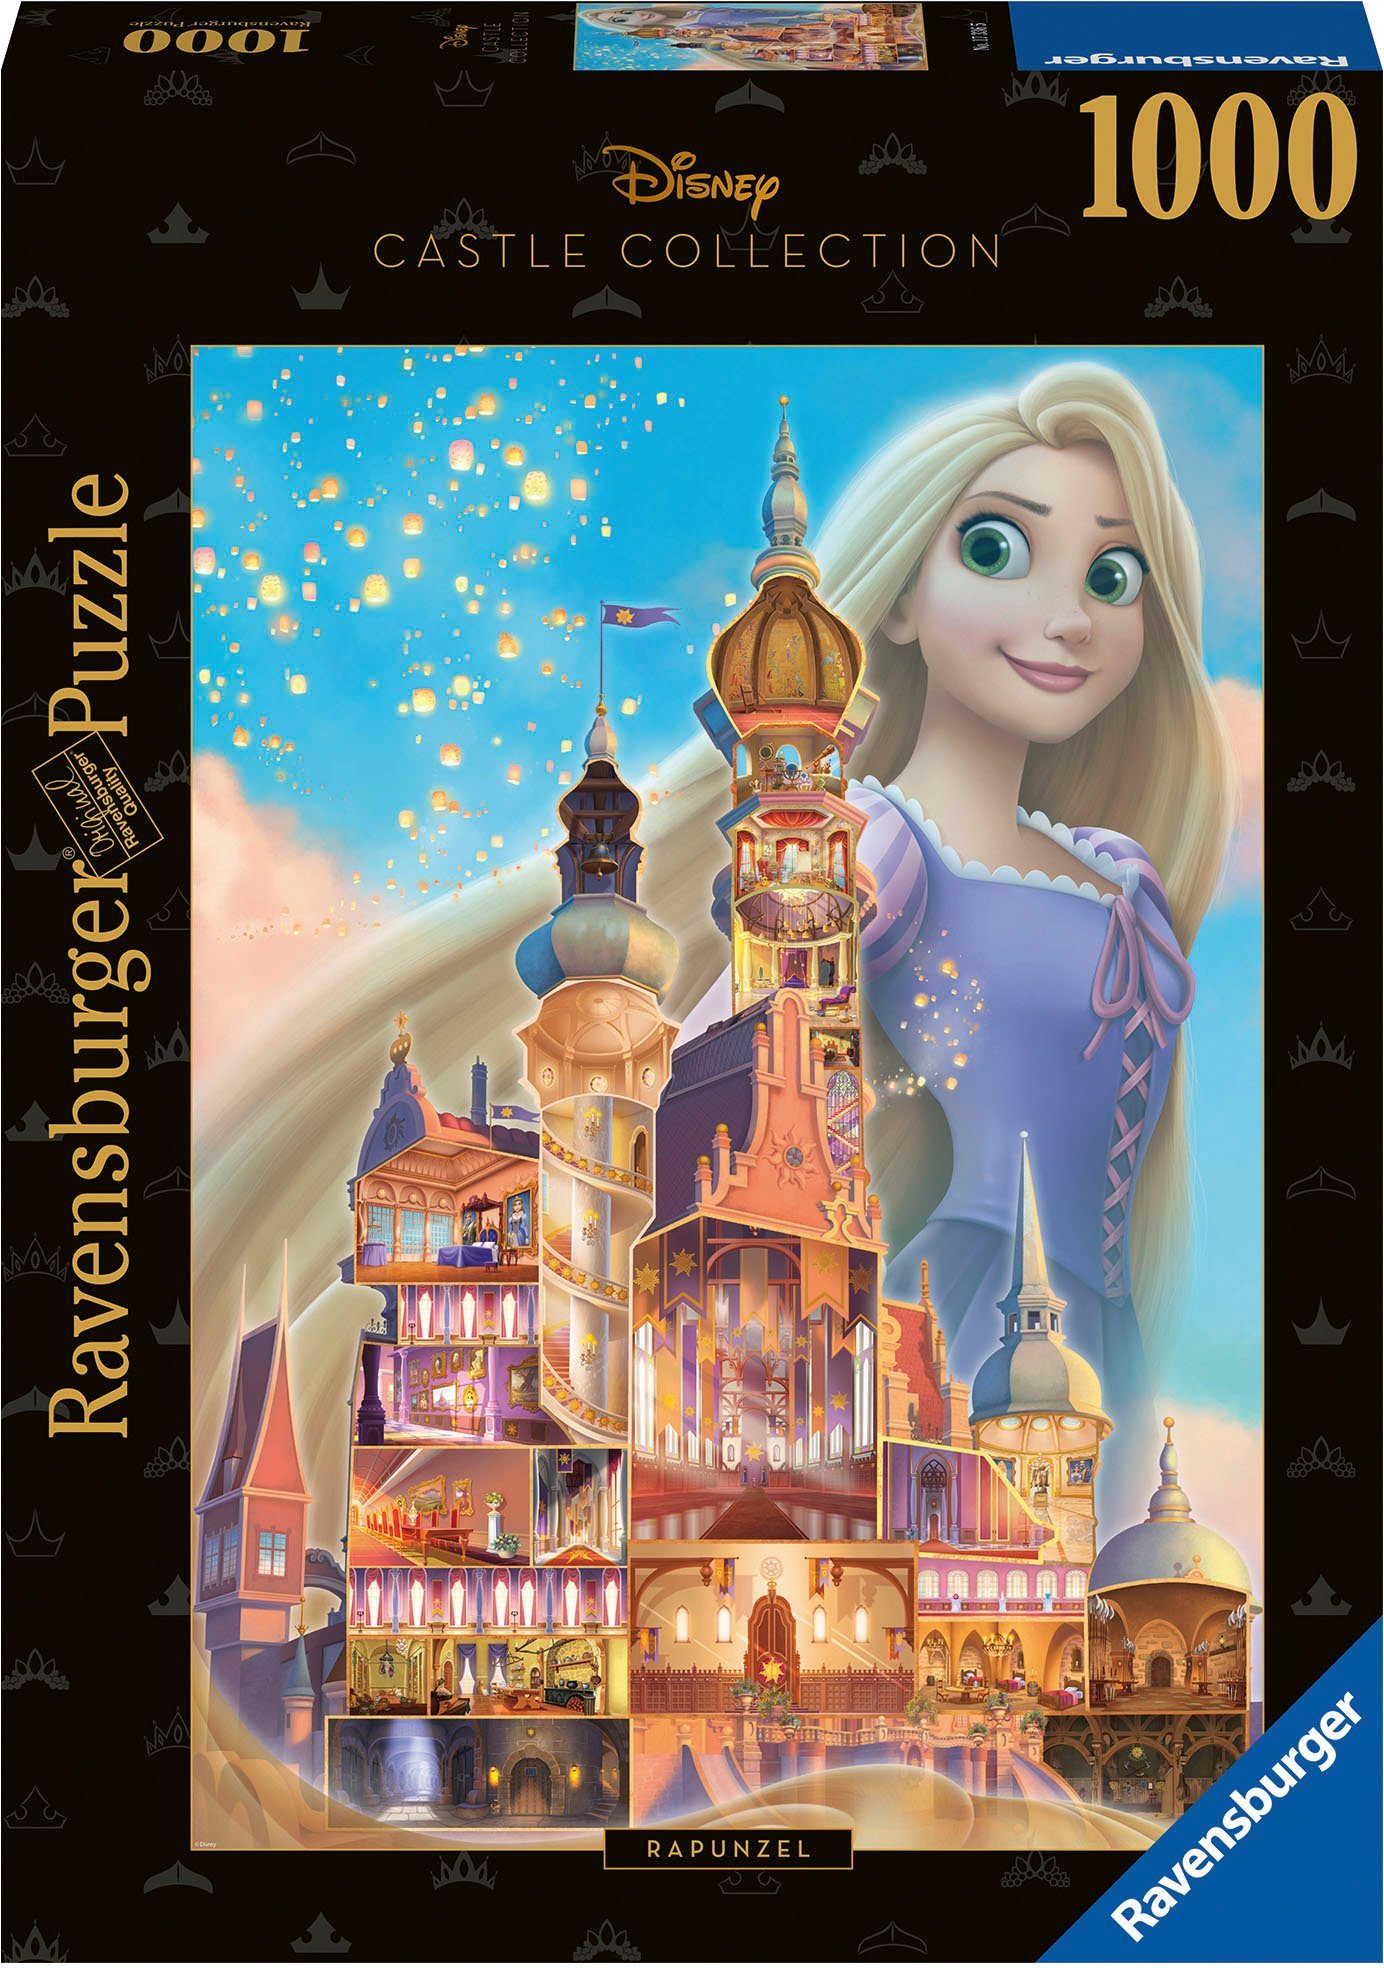 Made Disney Rapunzel, in Puzzleteile, Collection, 1000 Germany Puzzle Ravensburger Castle